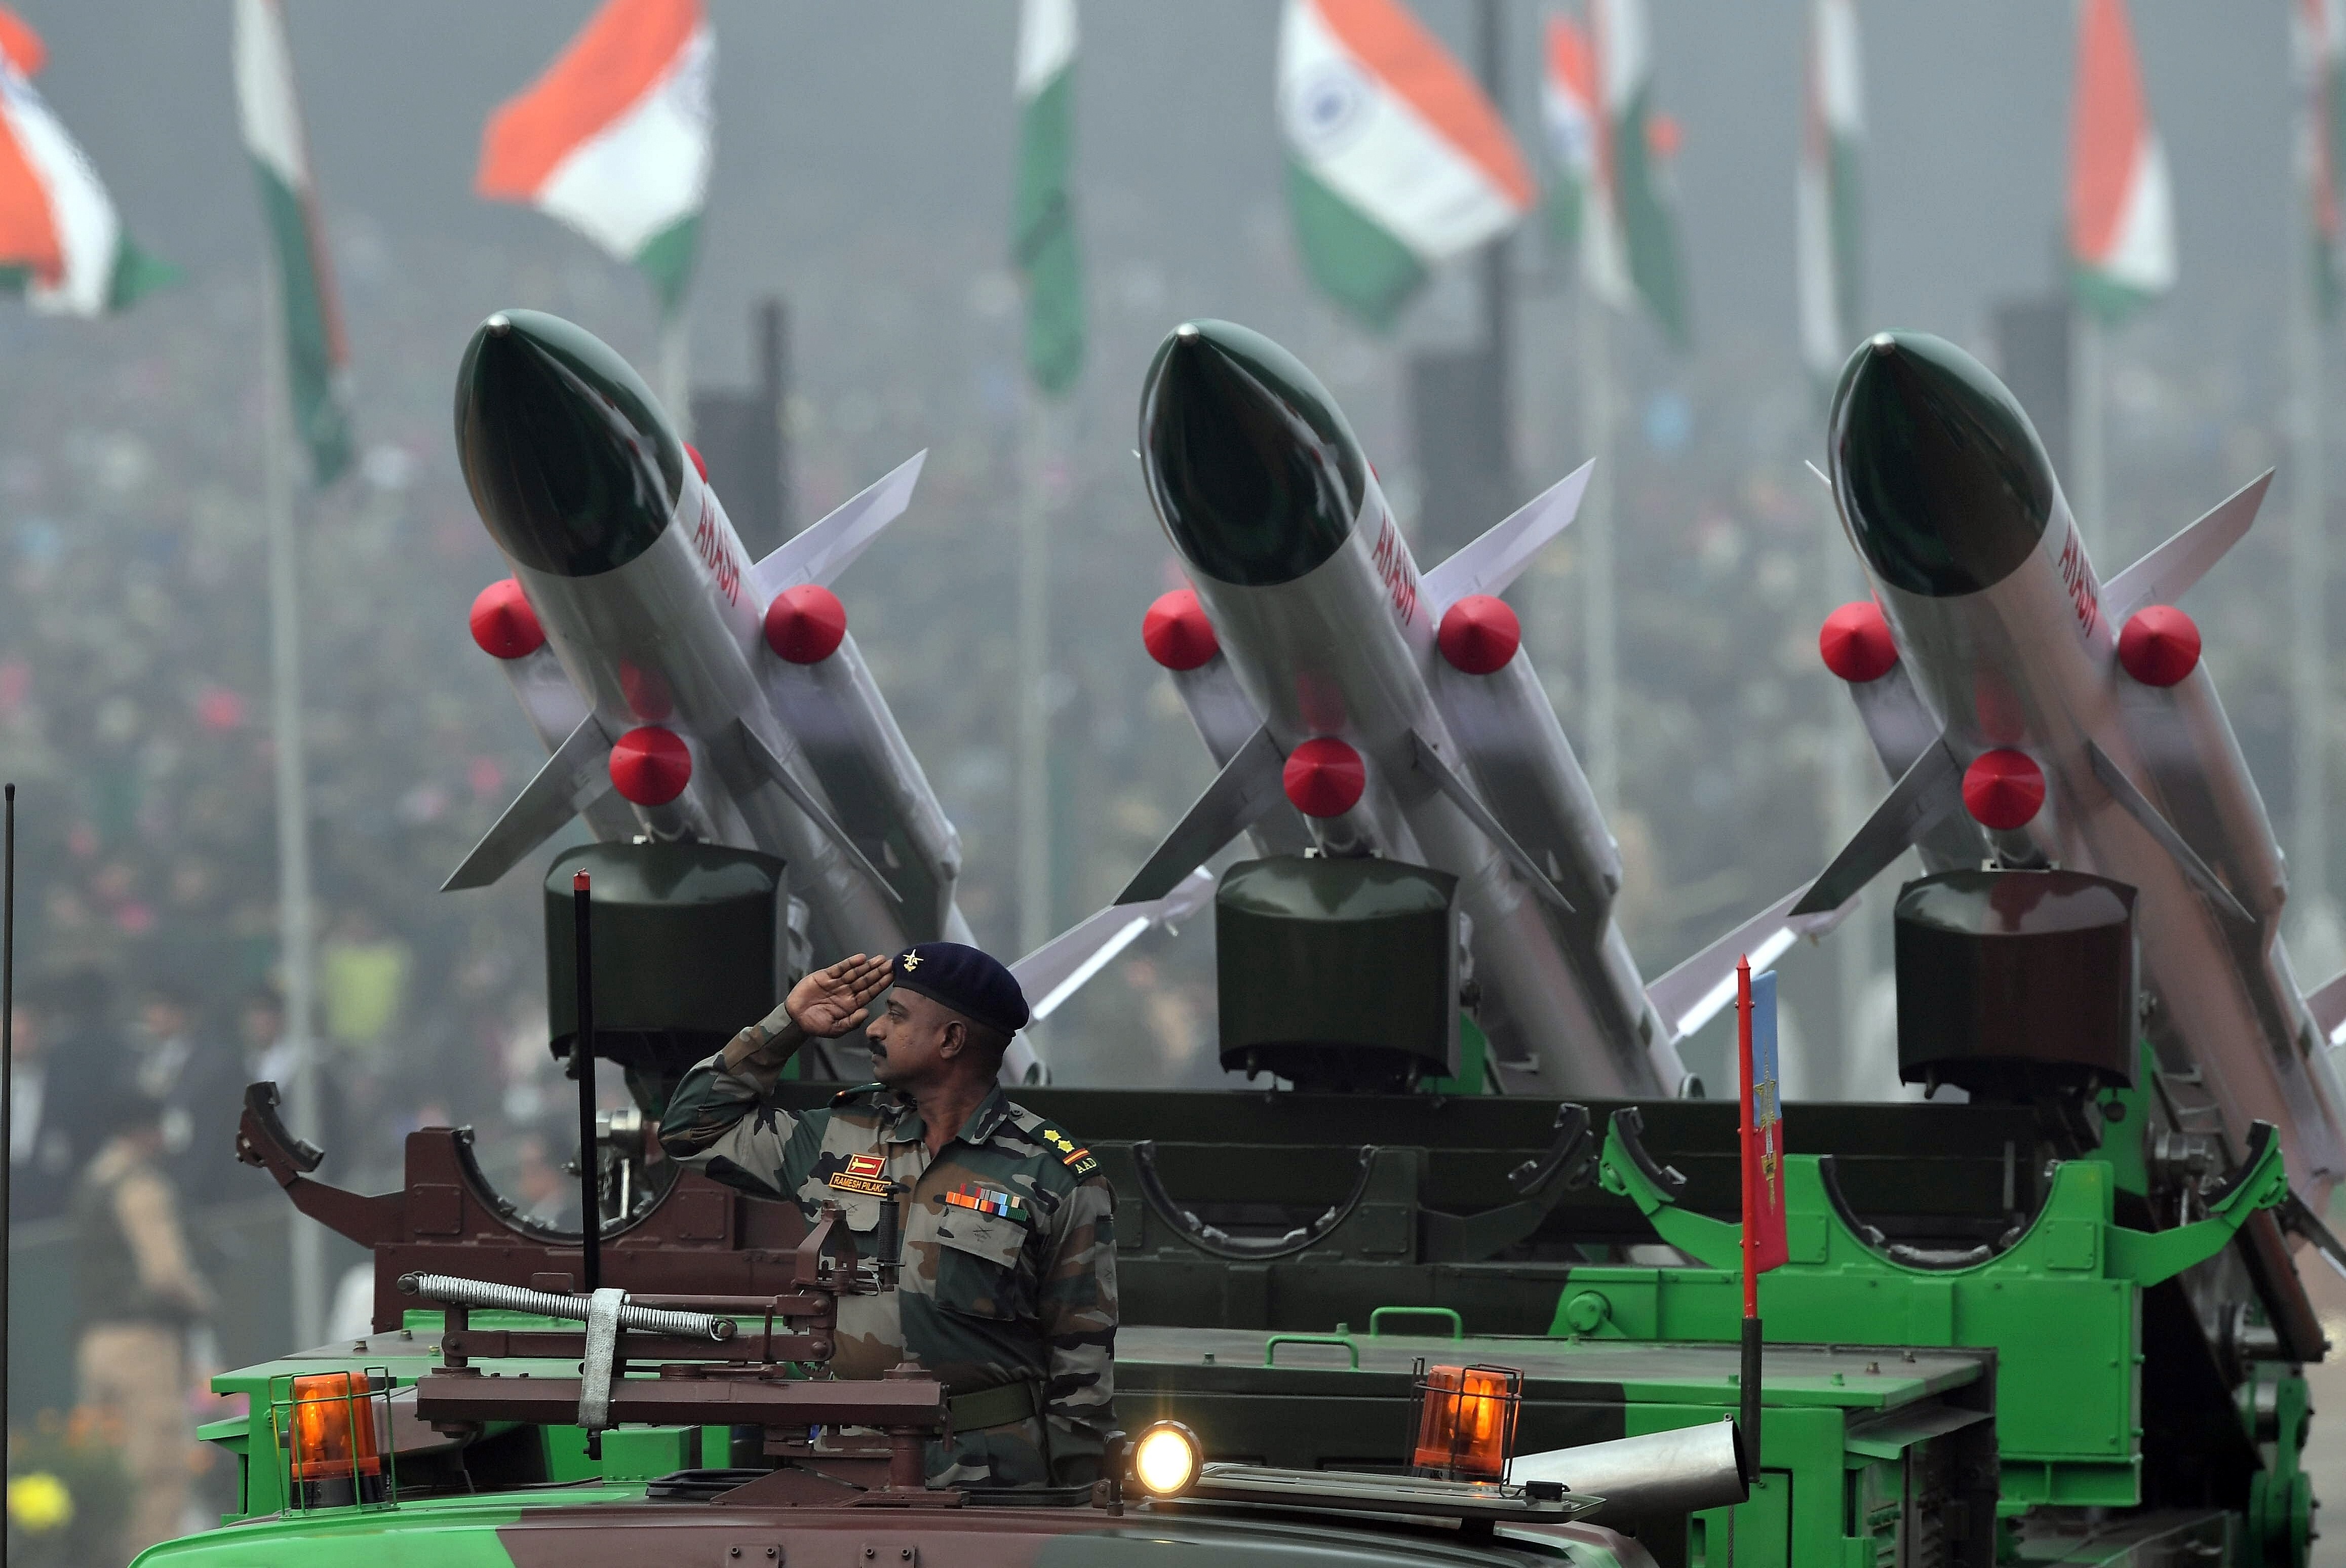 A member of the Indian army salutes from an Akash rocket launcher vehicle during the country’s 69th Republic Day parade in New Delhi on January 26, 2018. In terms of military expenditure, India ranks third in the world after the US and China. Photo: AFP